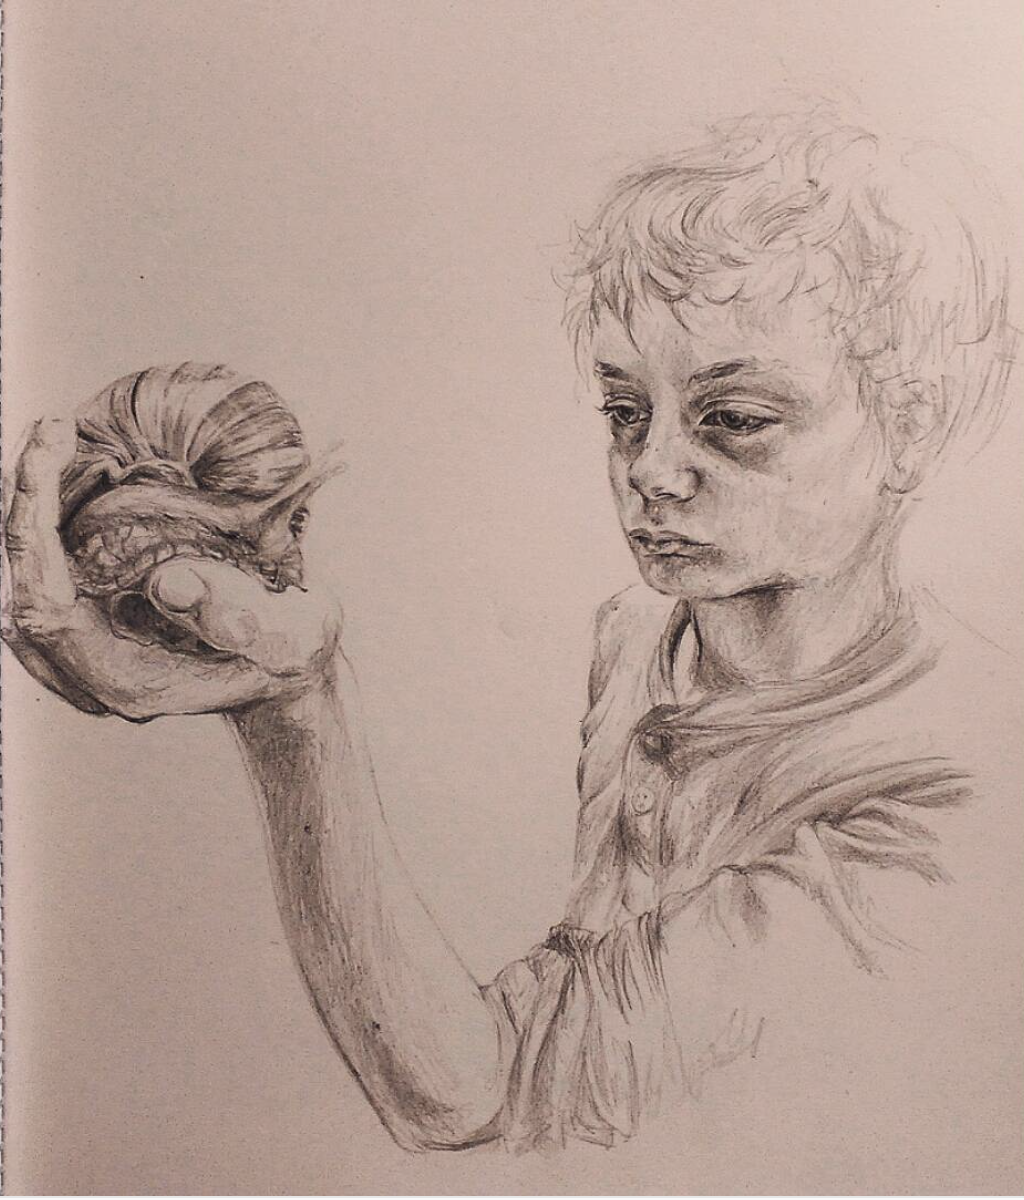 Dylan with Snail